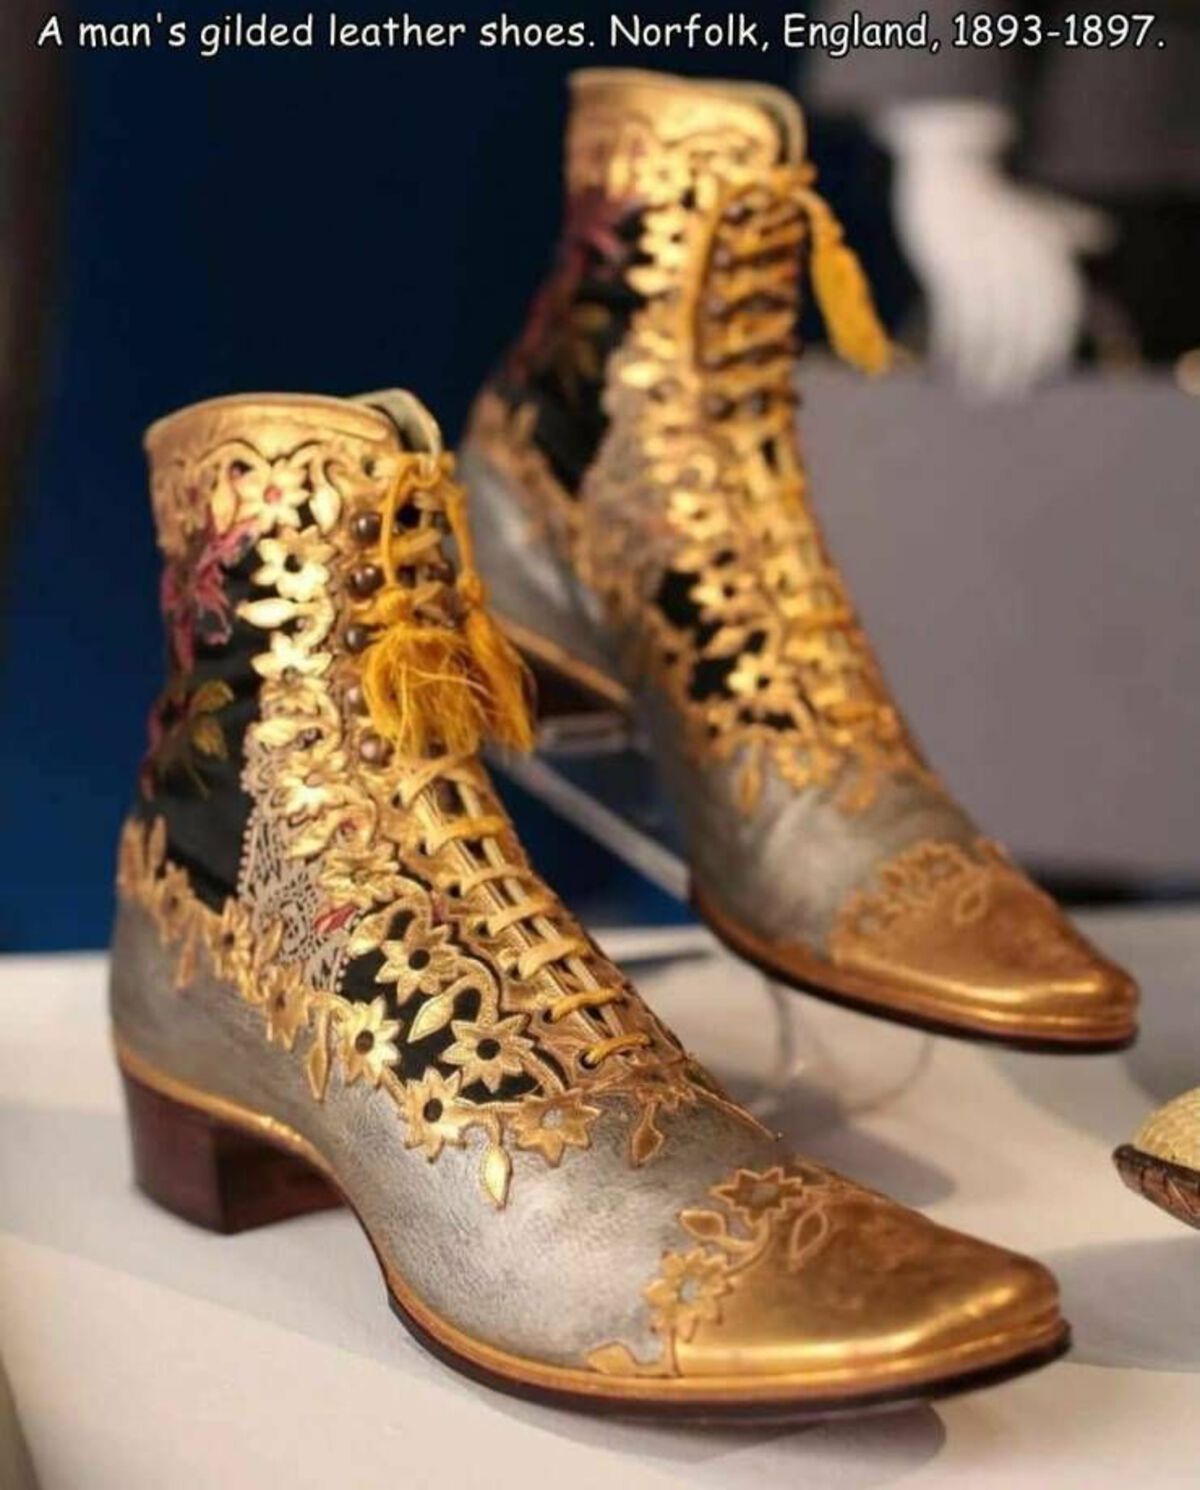 work boots - A man's gilded leather shoes. Norfolk, England, 18931897.